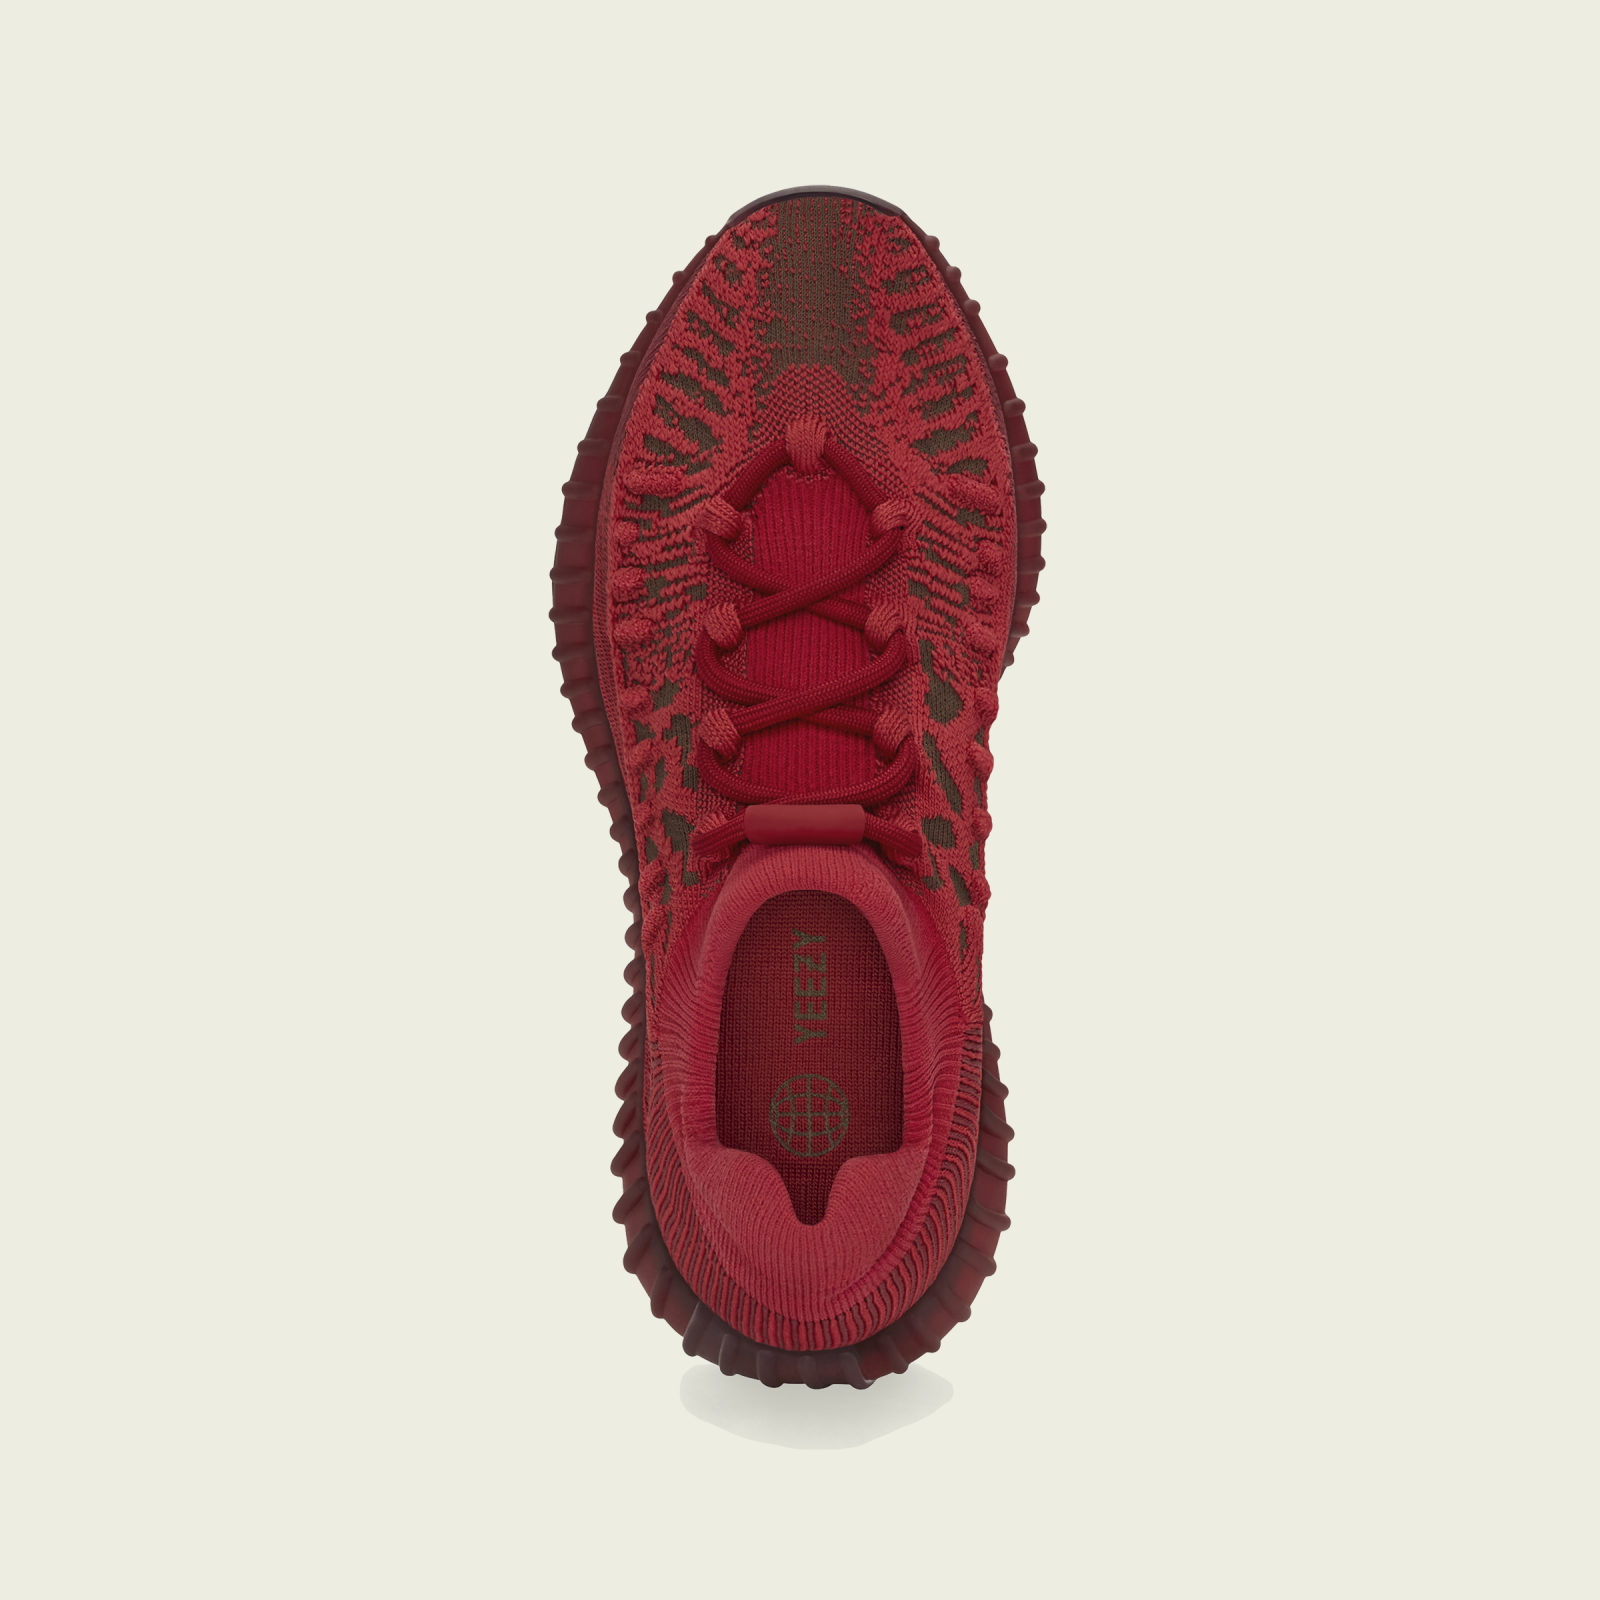 Adidas Yeezy Boost
350 V2 CMPCT
« Slate Red »